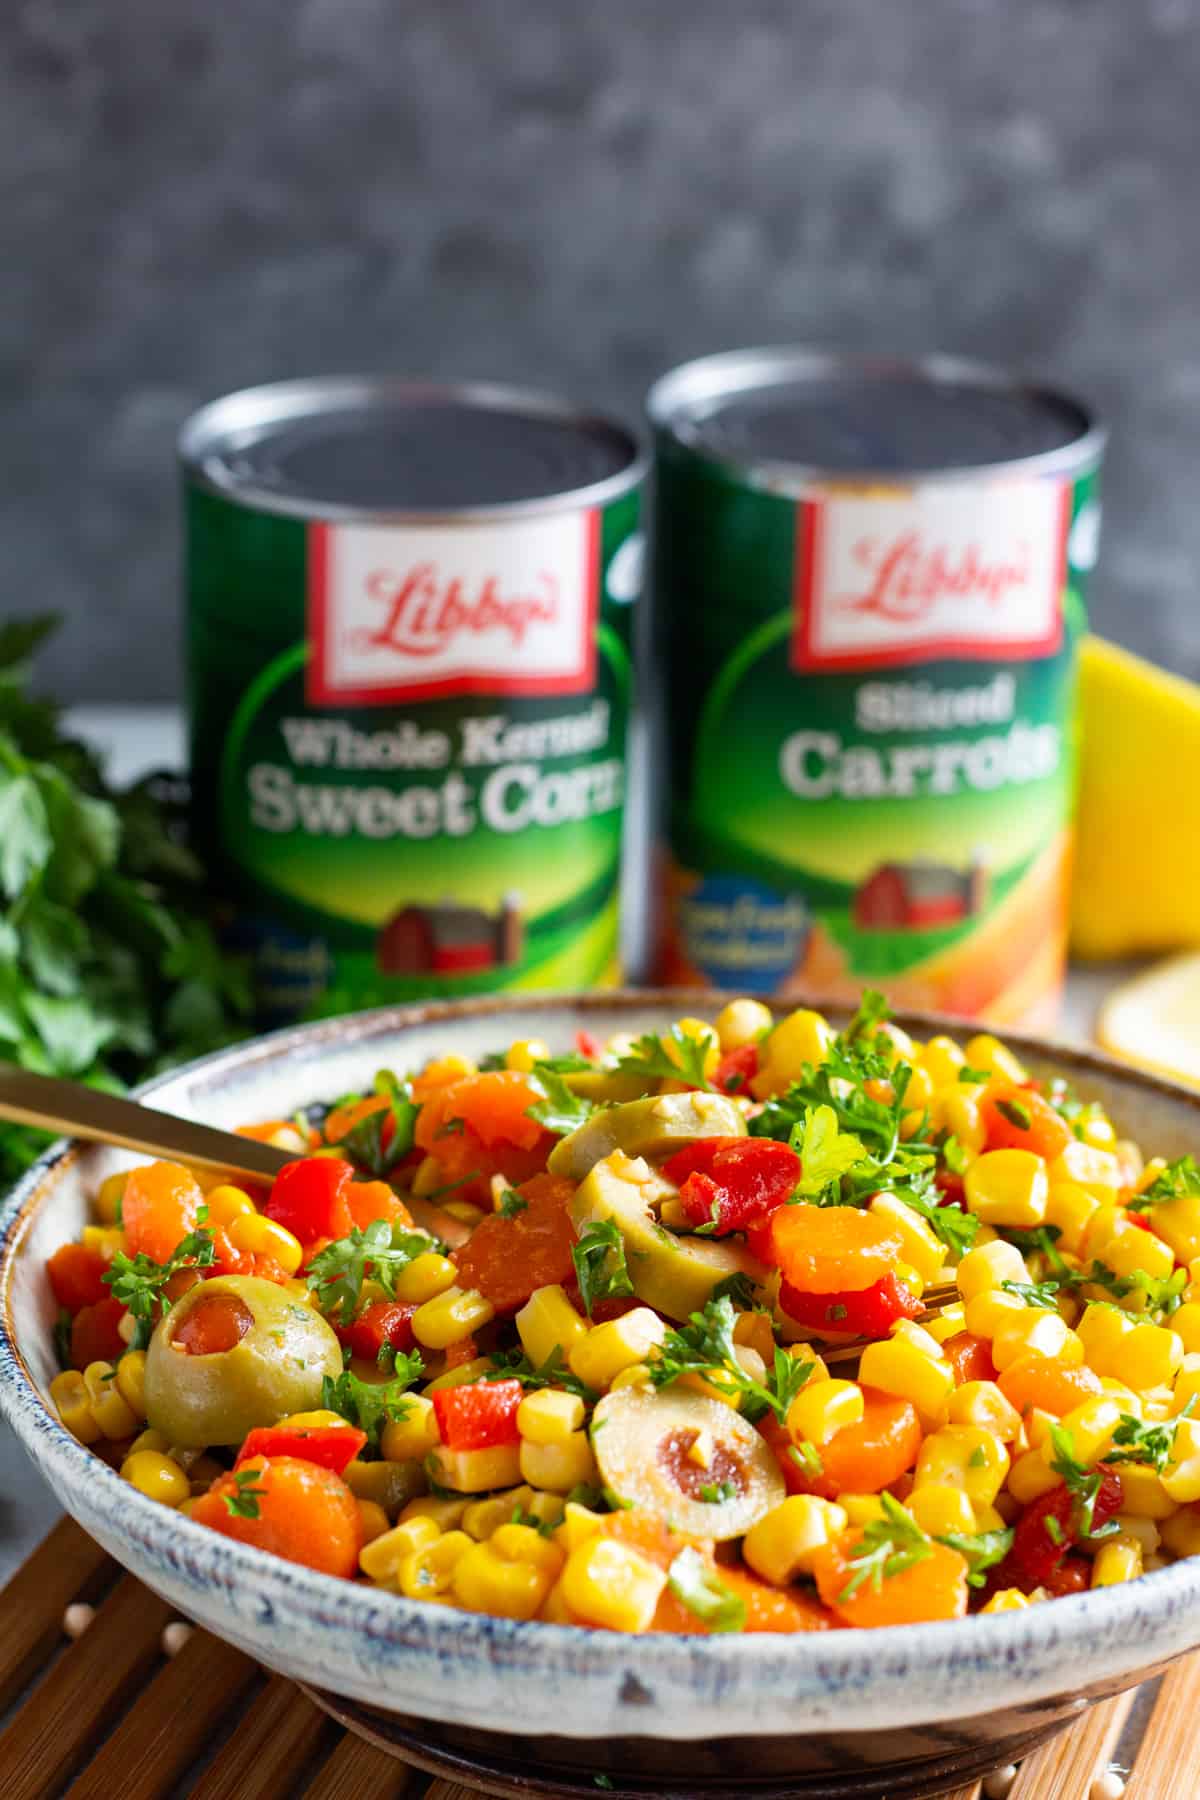 I used libby's sweet corn and carrots for this recipe.